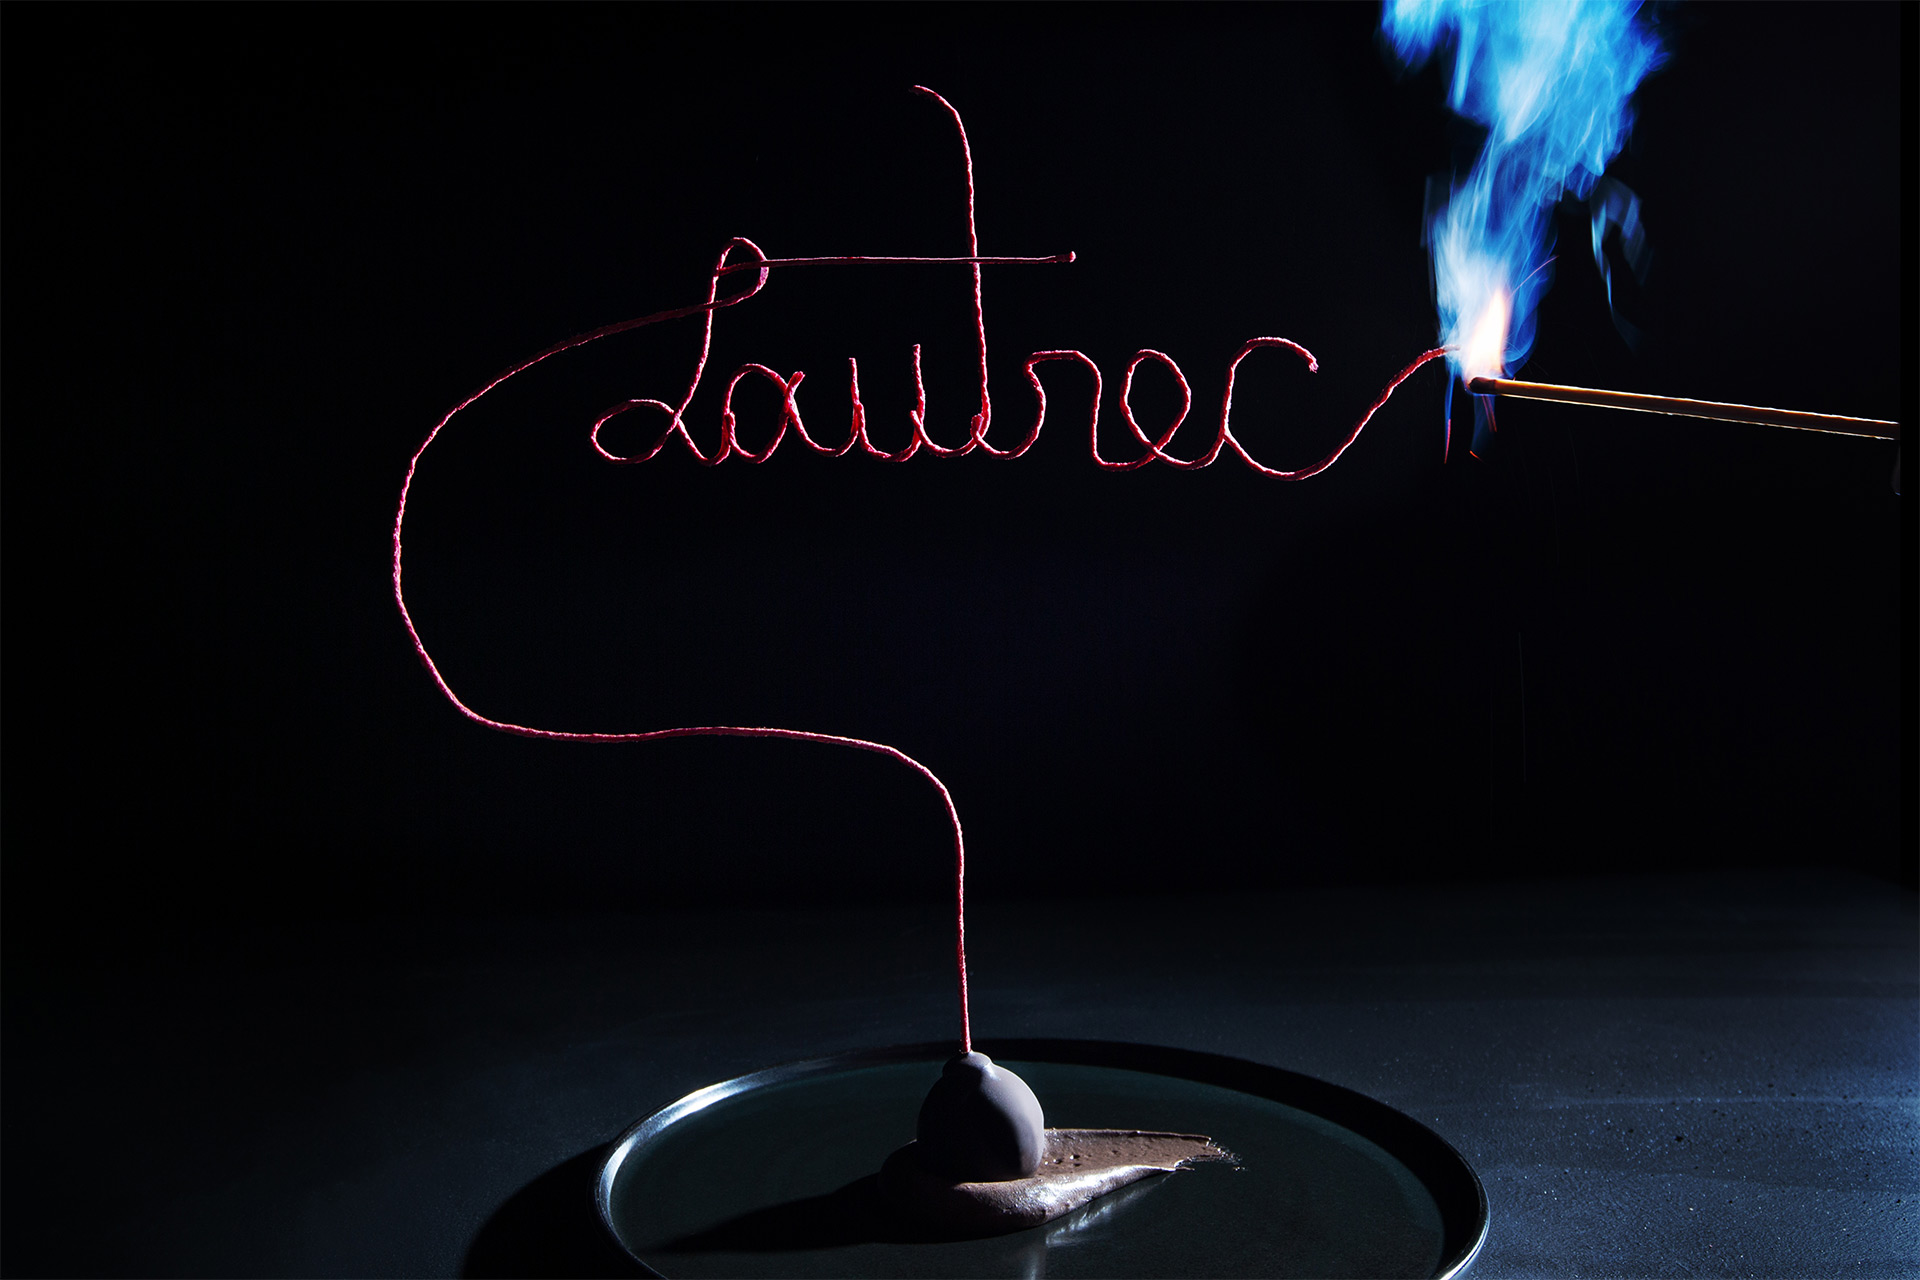 A fancy wick that spells "Lautrec" in cursive being lit by a match